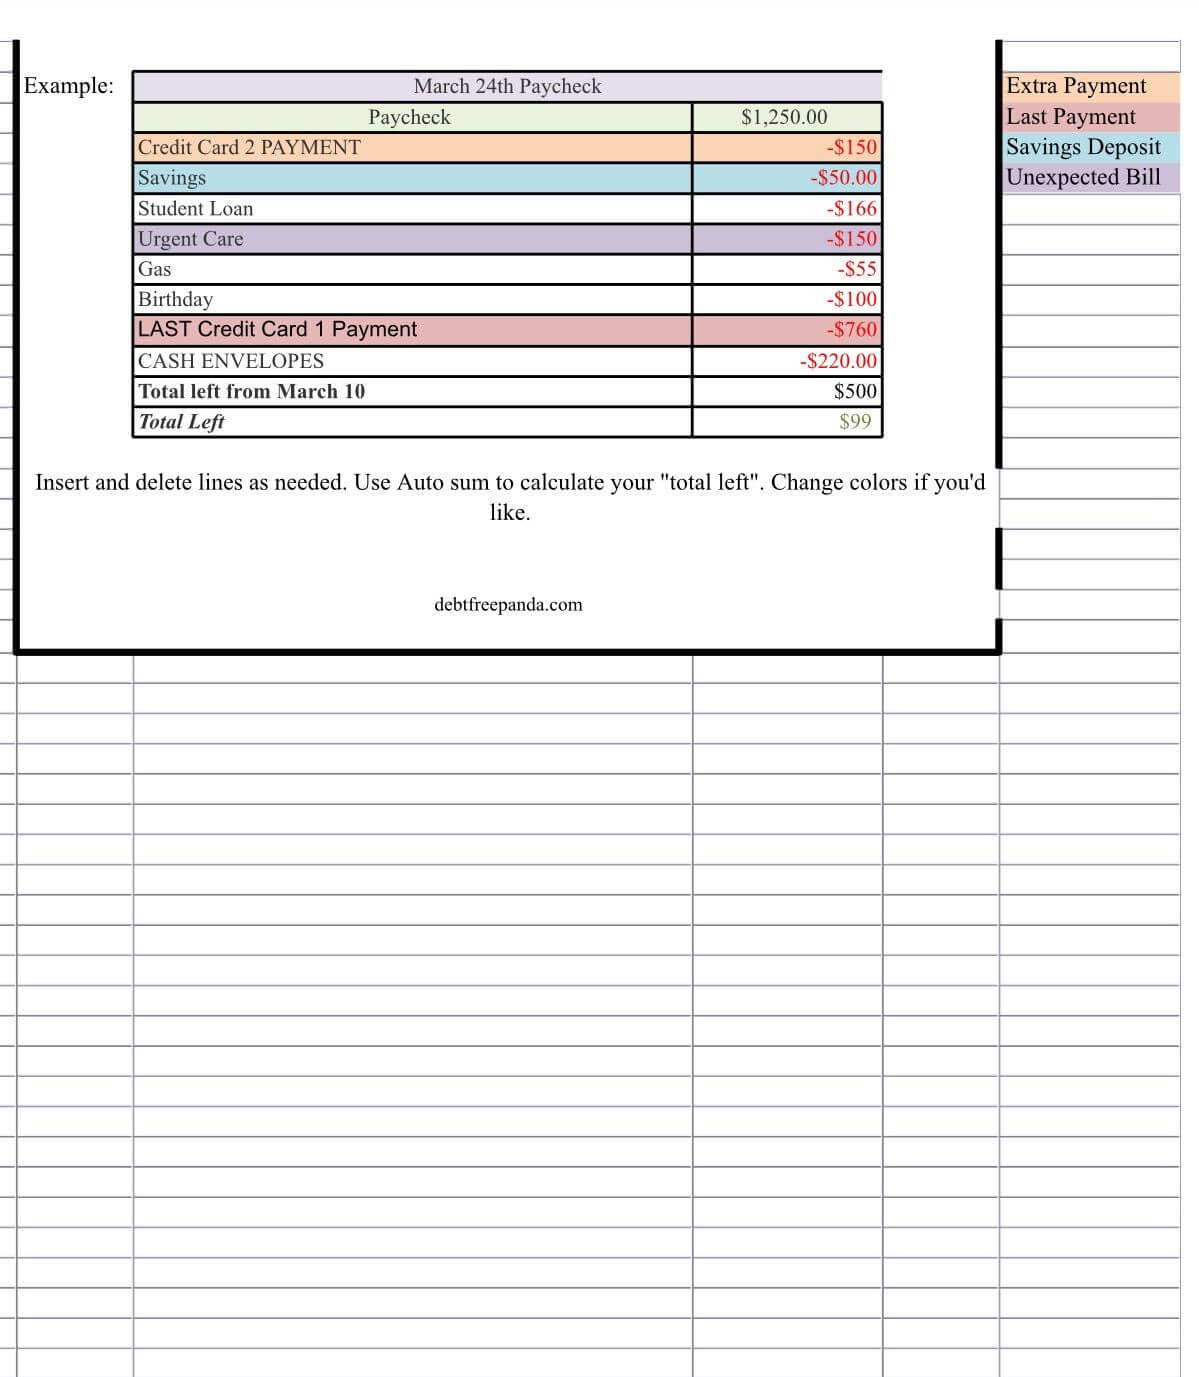 Free Budget Template. Dave Ramsey Budget. Debt Snowball Pertaining To Credit Card Payment Spreadsheet Template